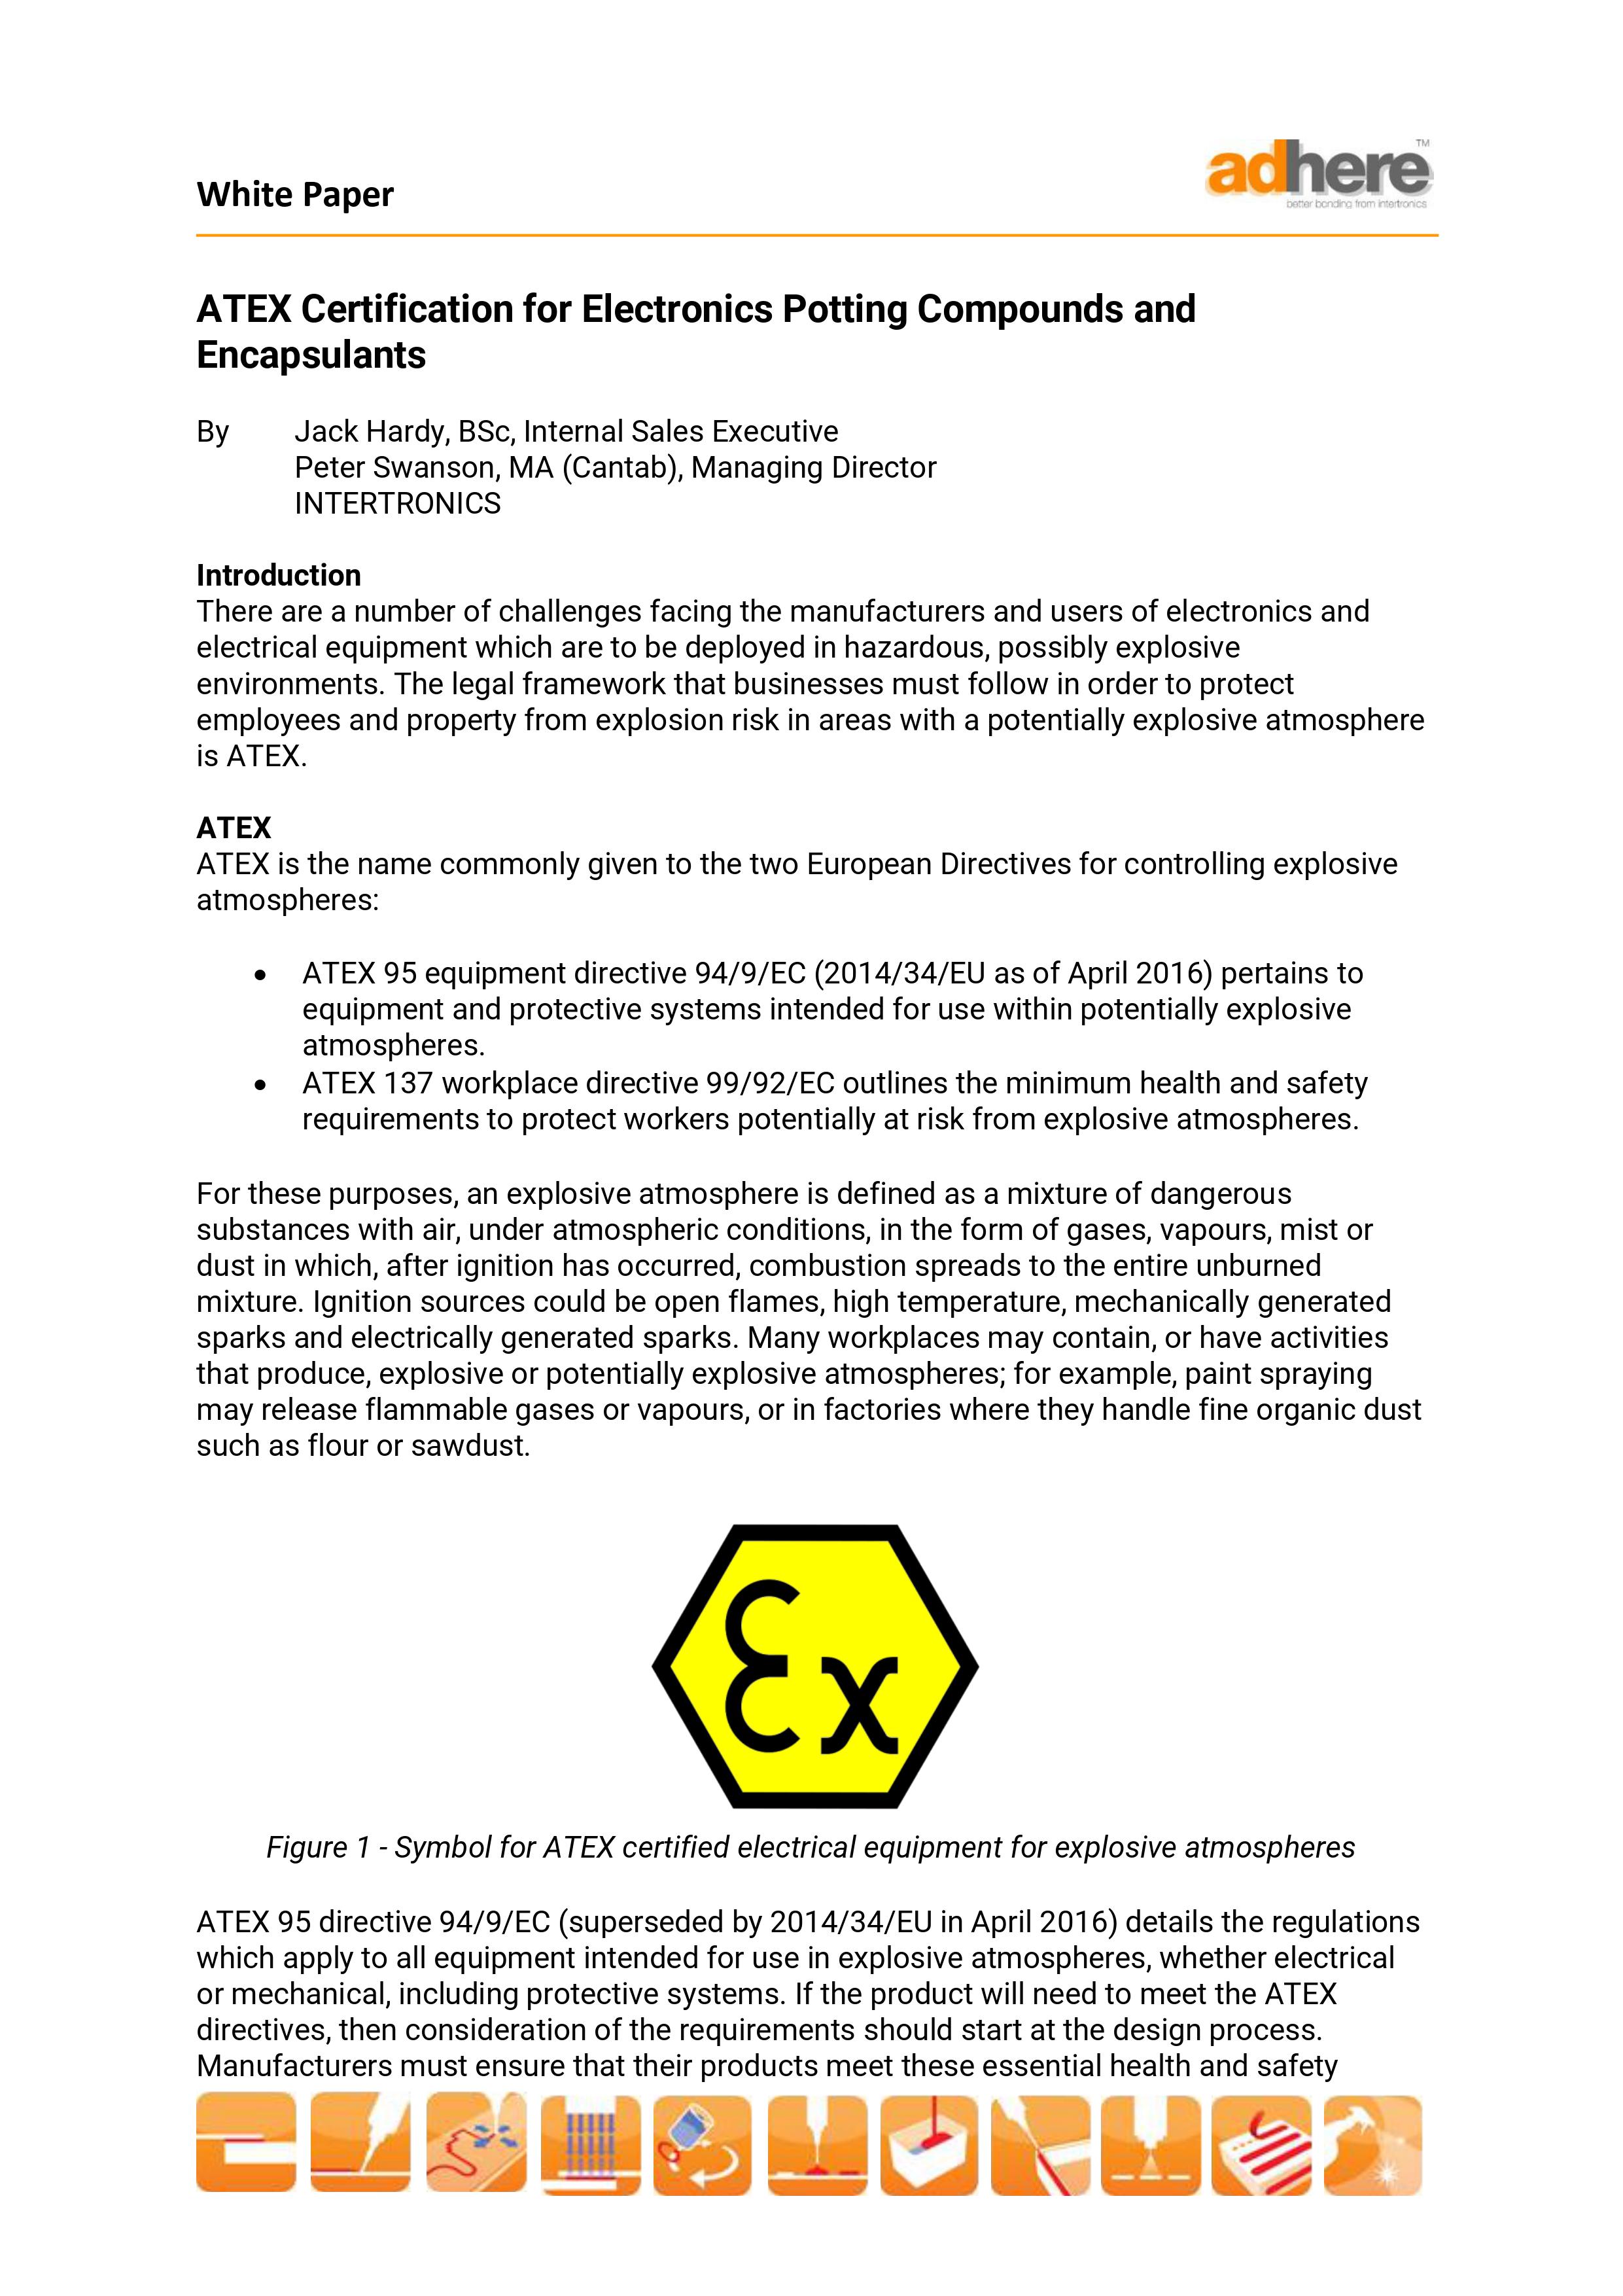 wp16-1 ATEX certification for electronics potting compounds and encapsulants